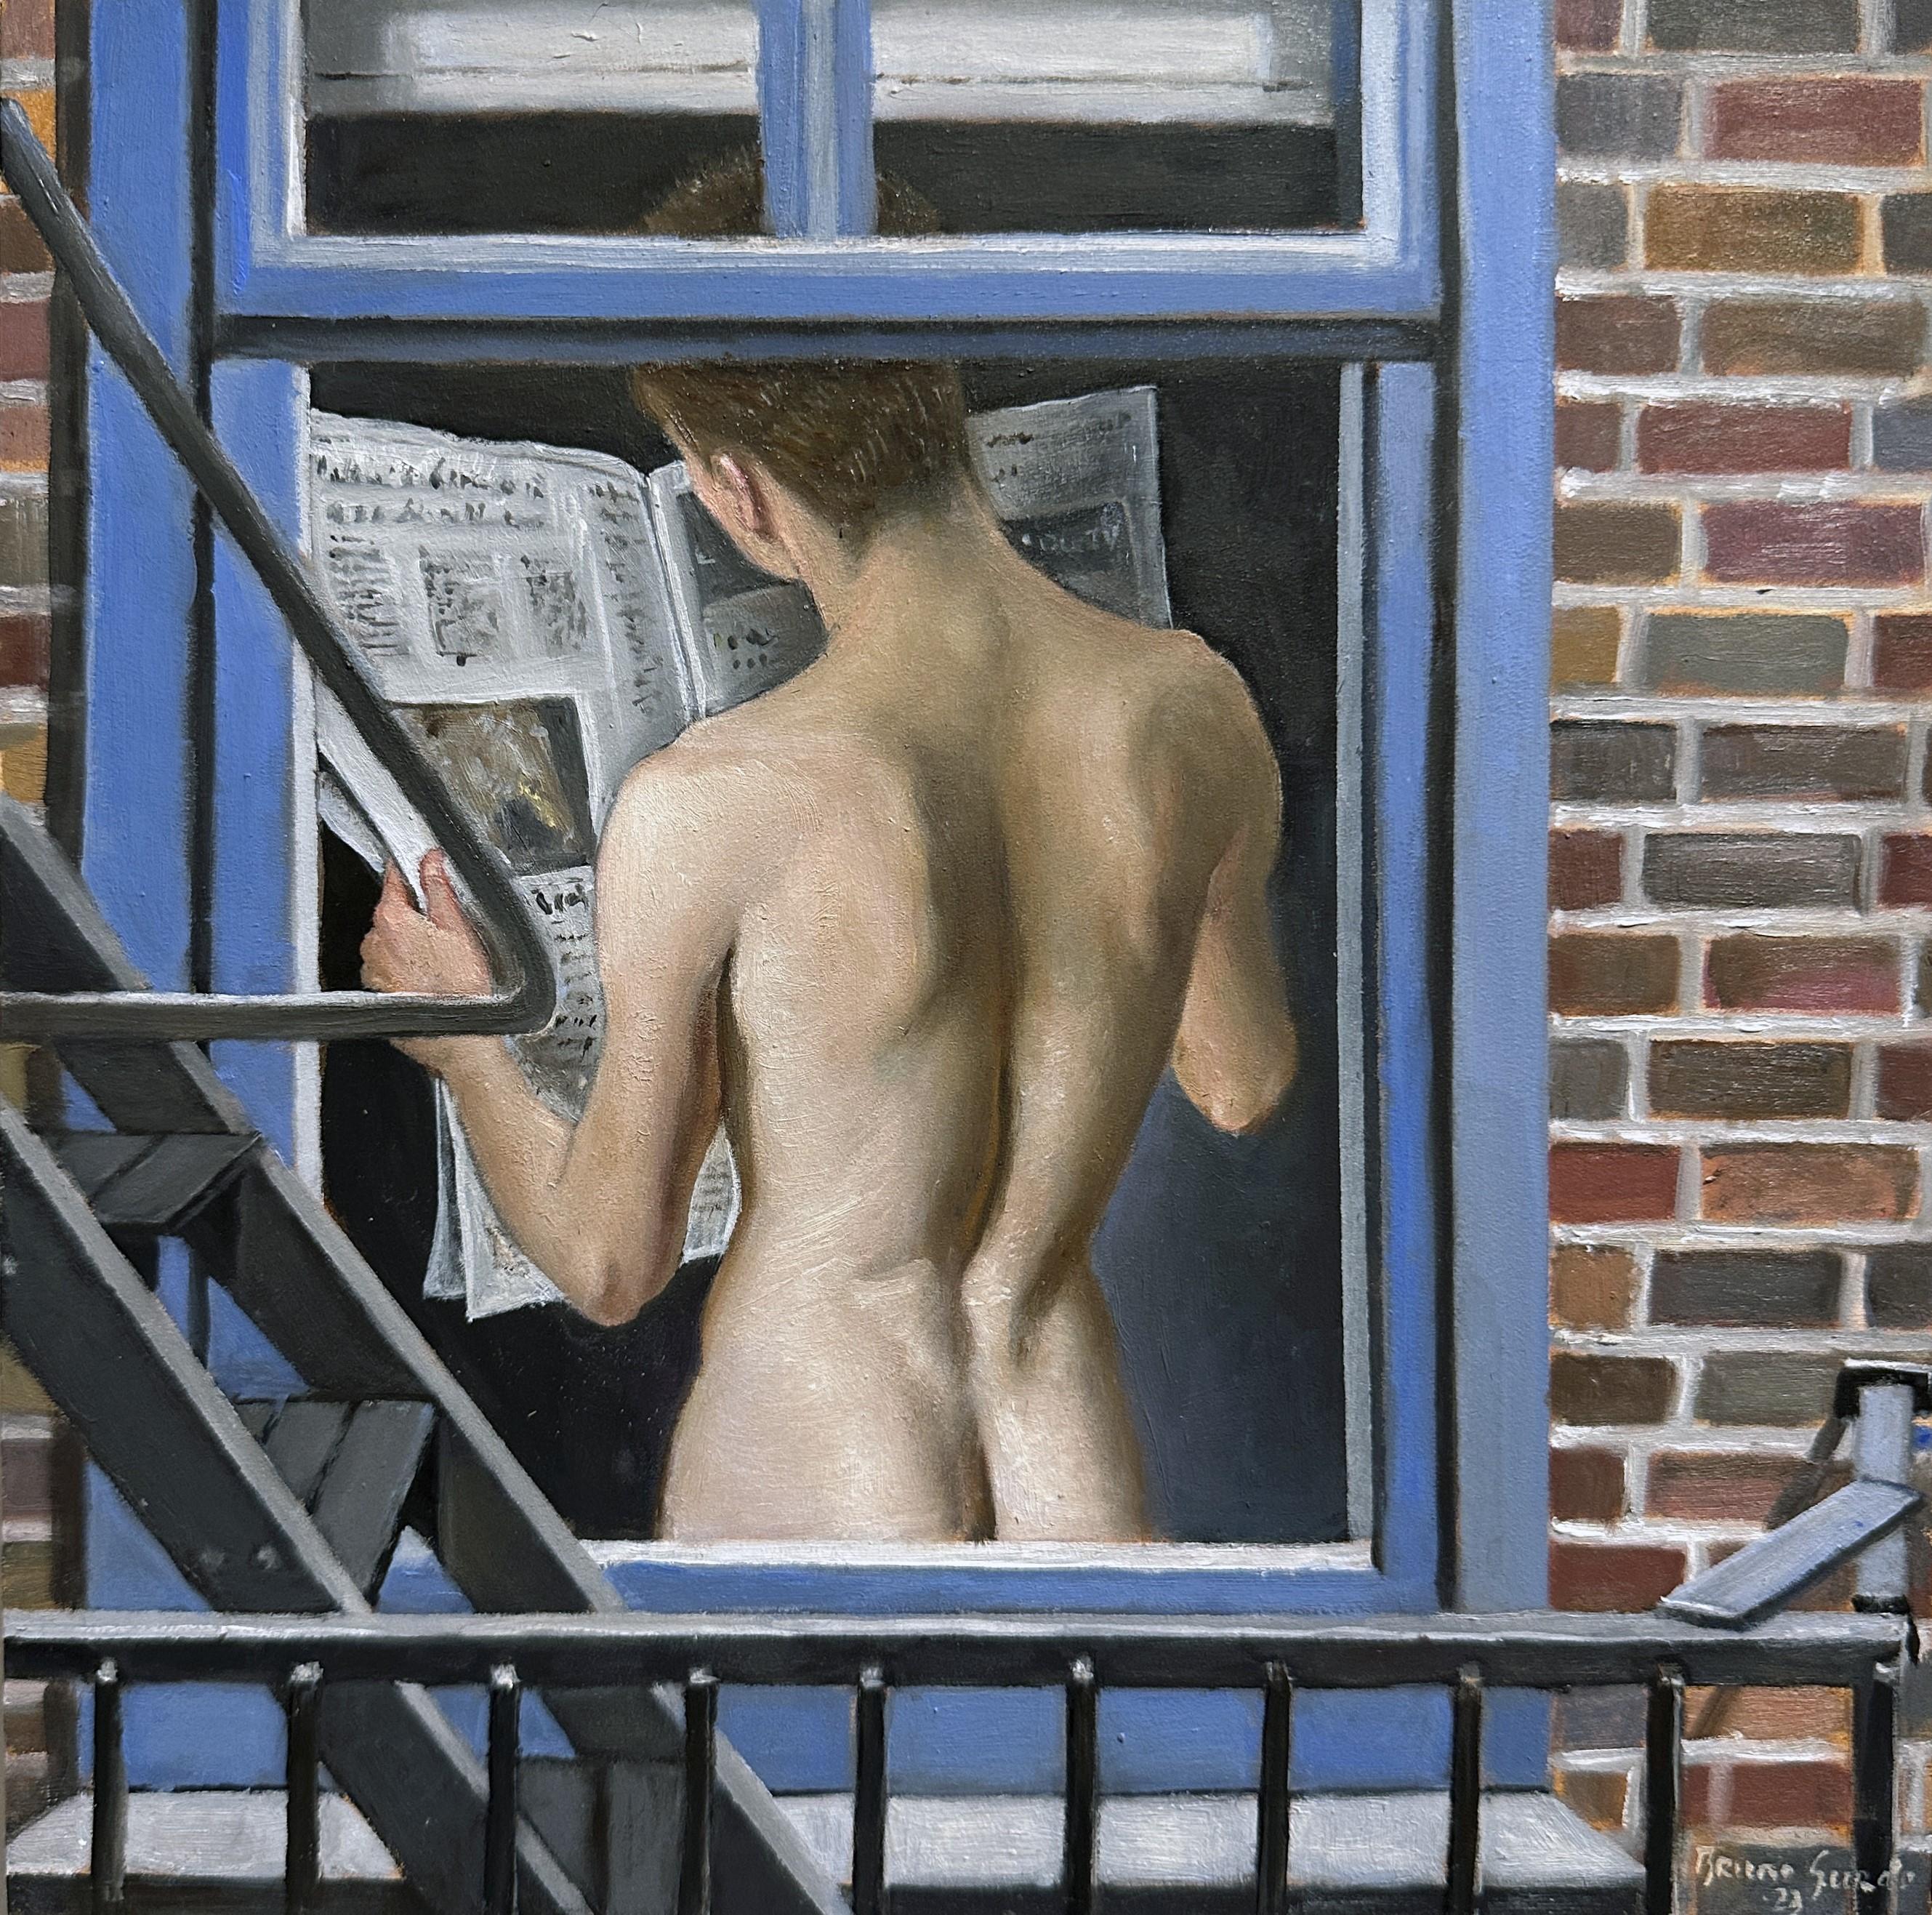 Morning News - Voyeuristic View of Nude Male Torso Through the Fire Escape  - Contemporary Painting by Bruno Surdo